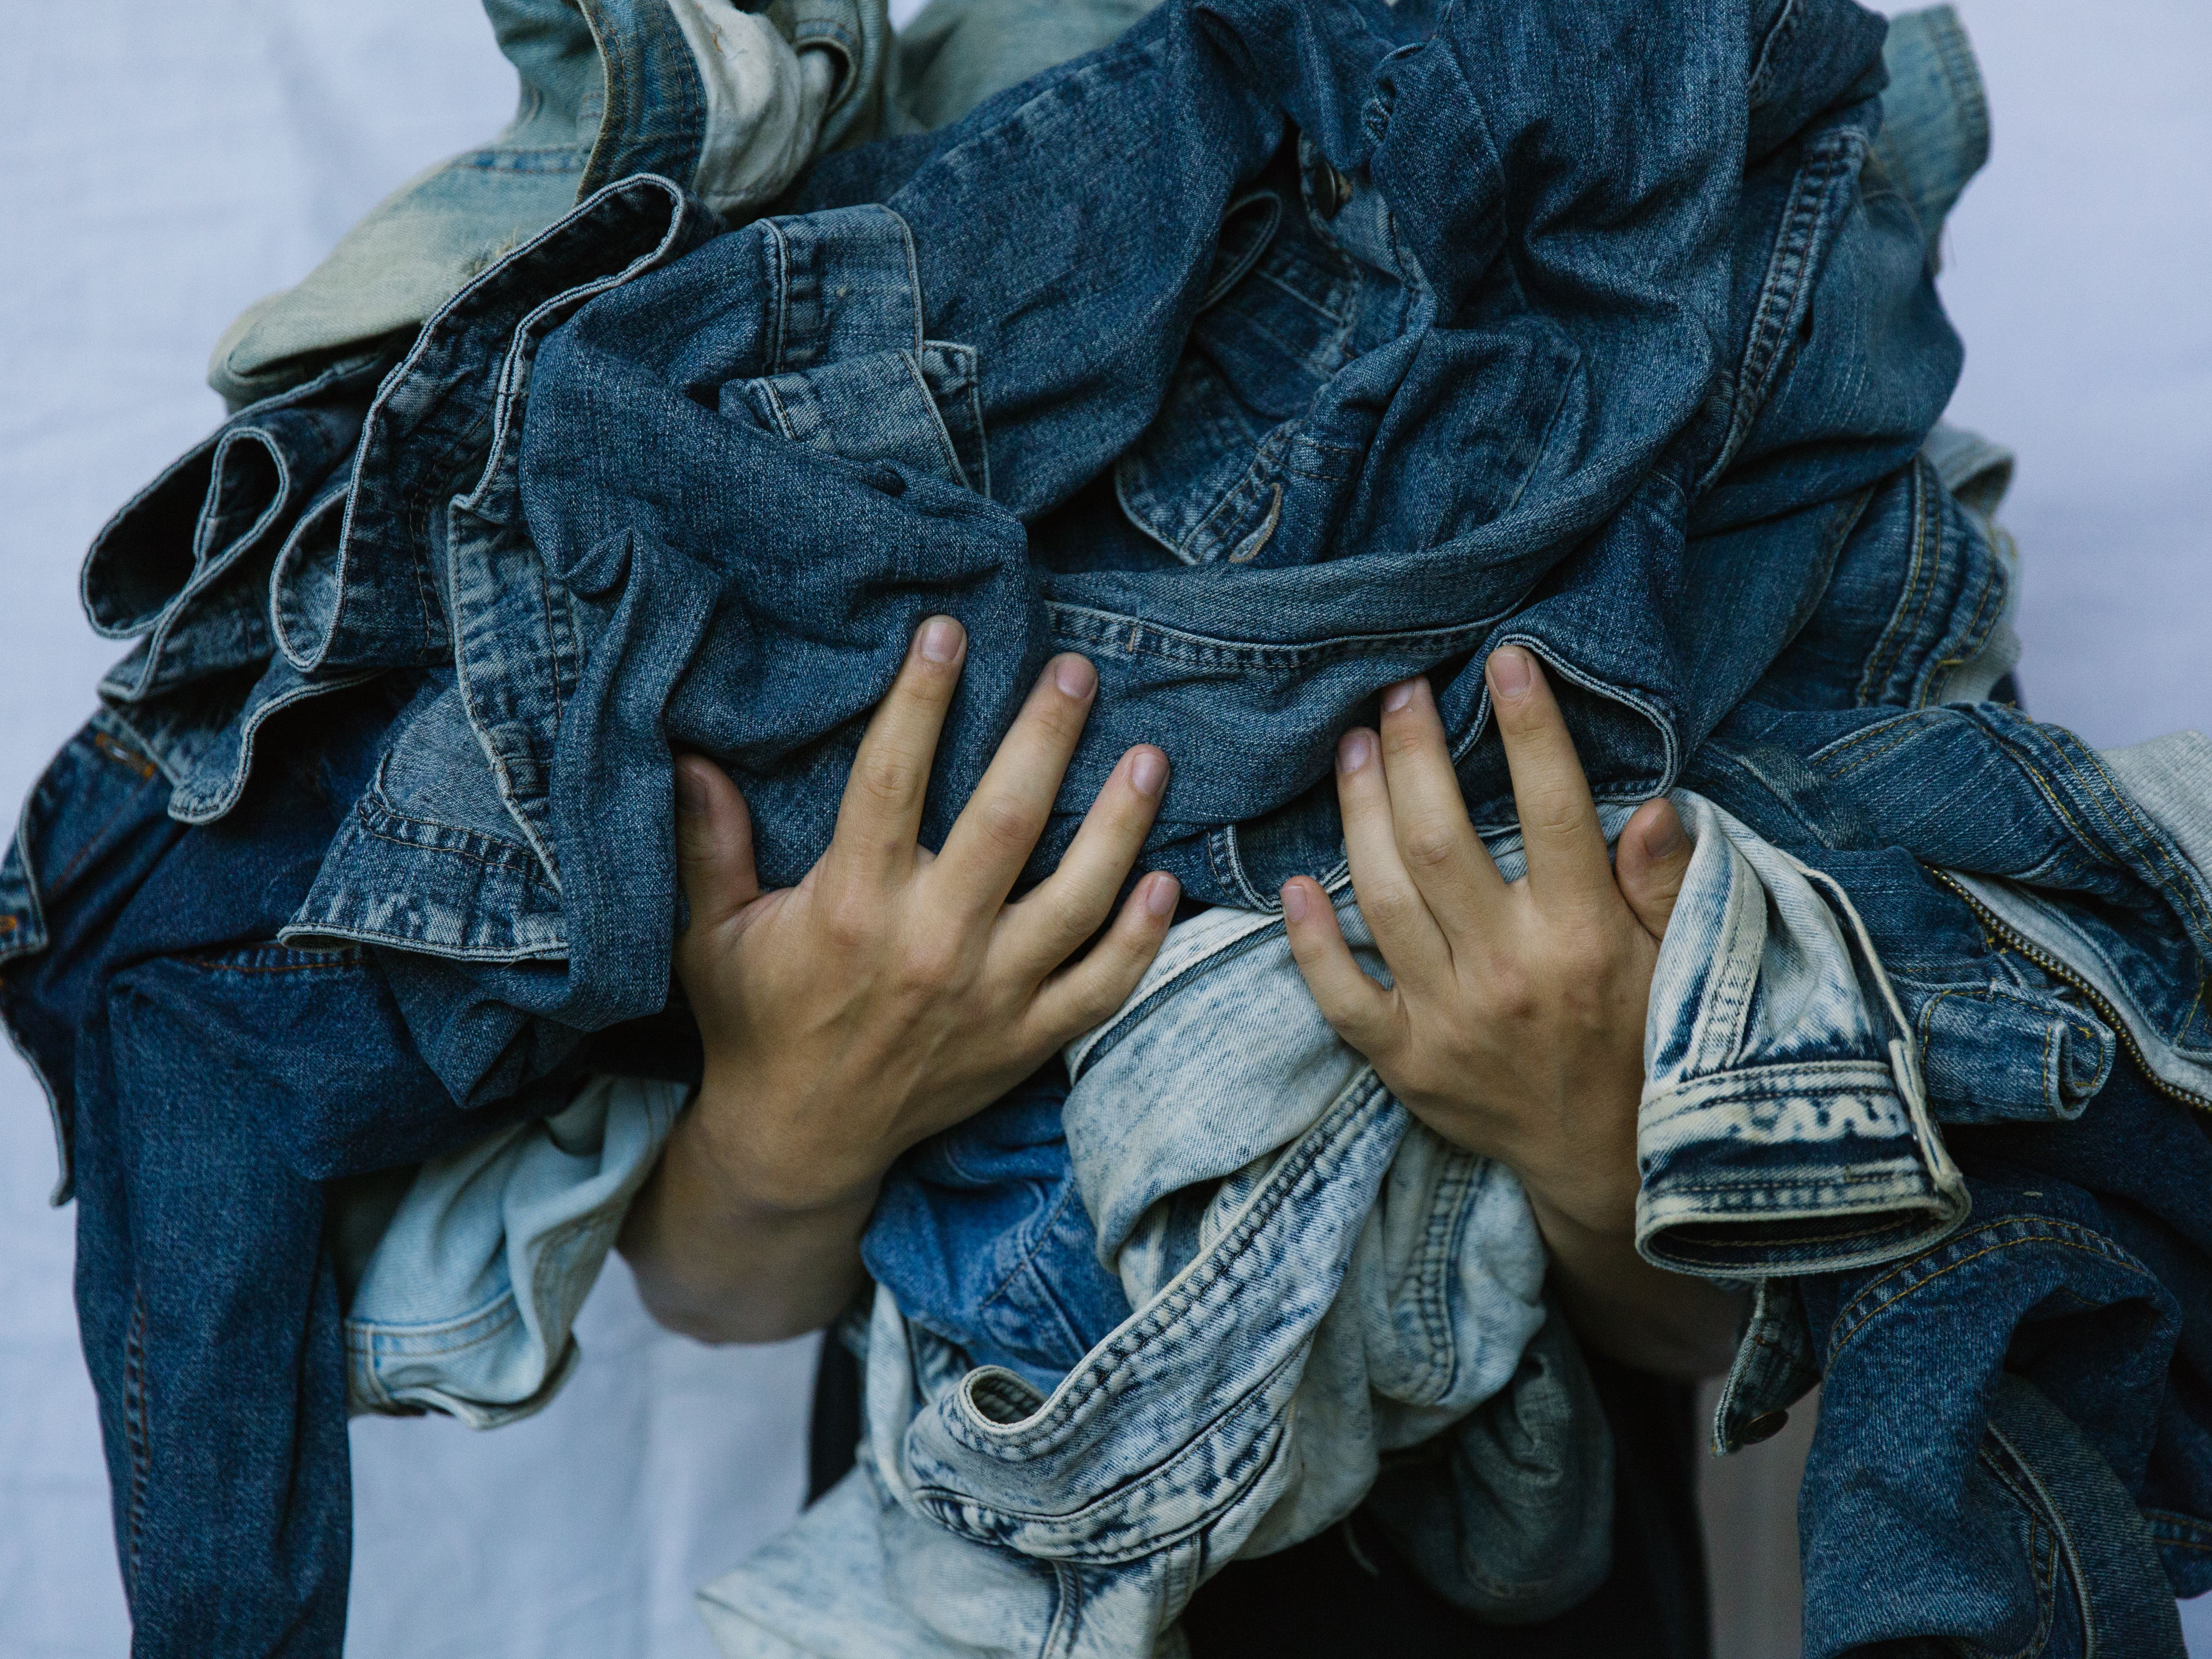 Two hands holding a pile of denim gsrments